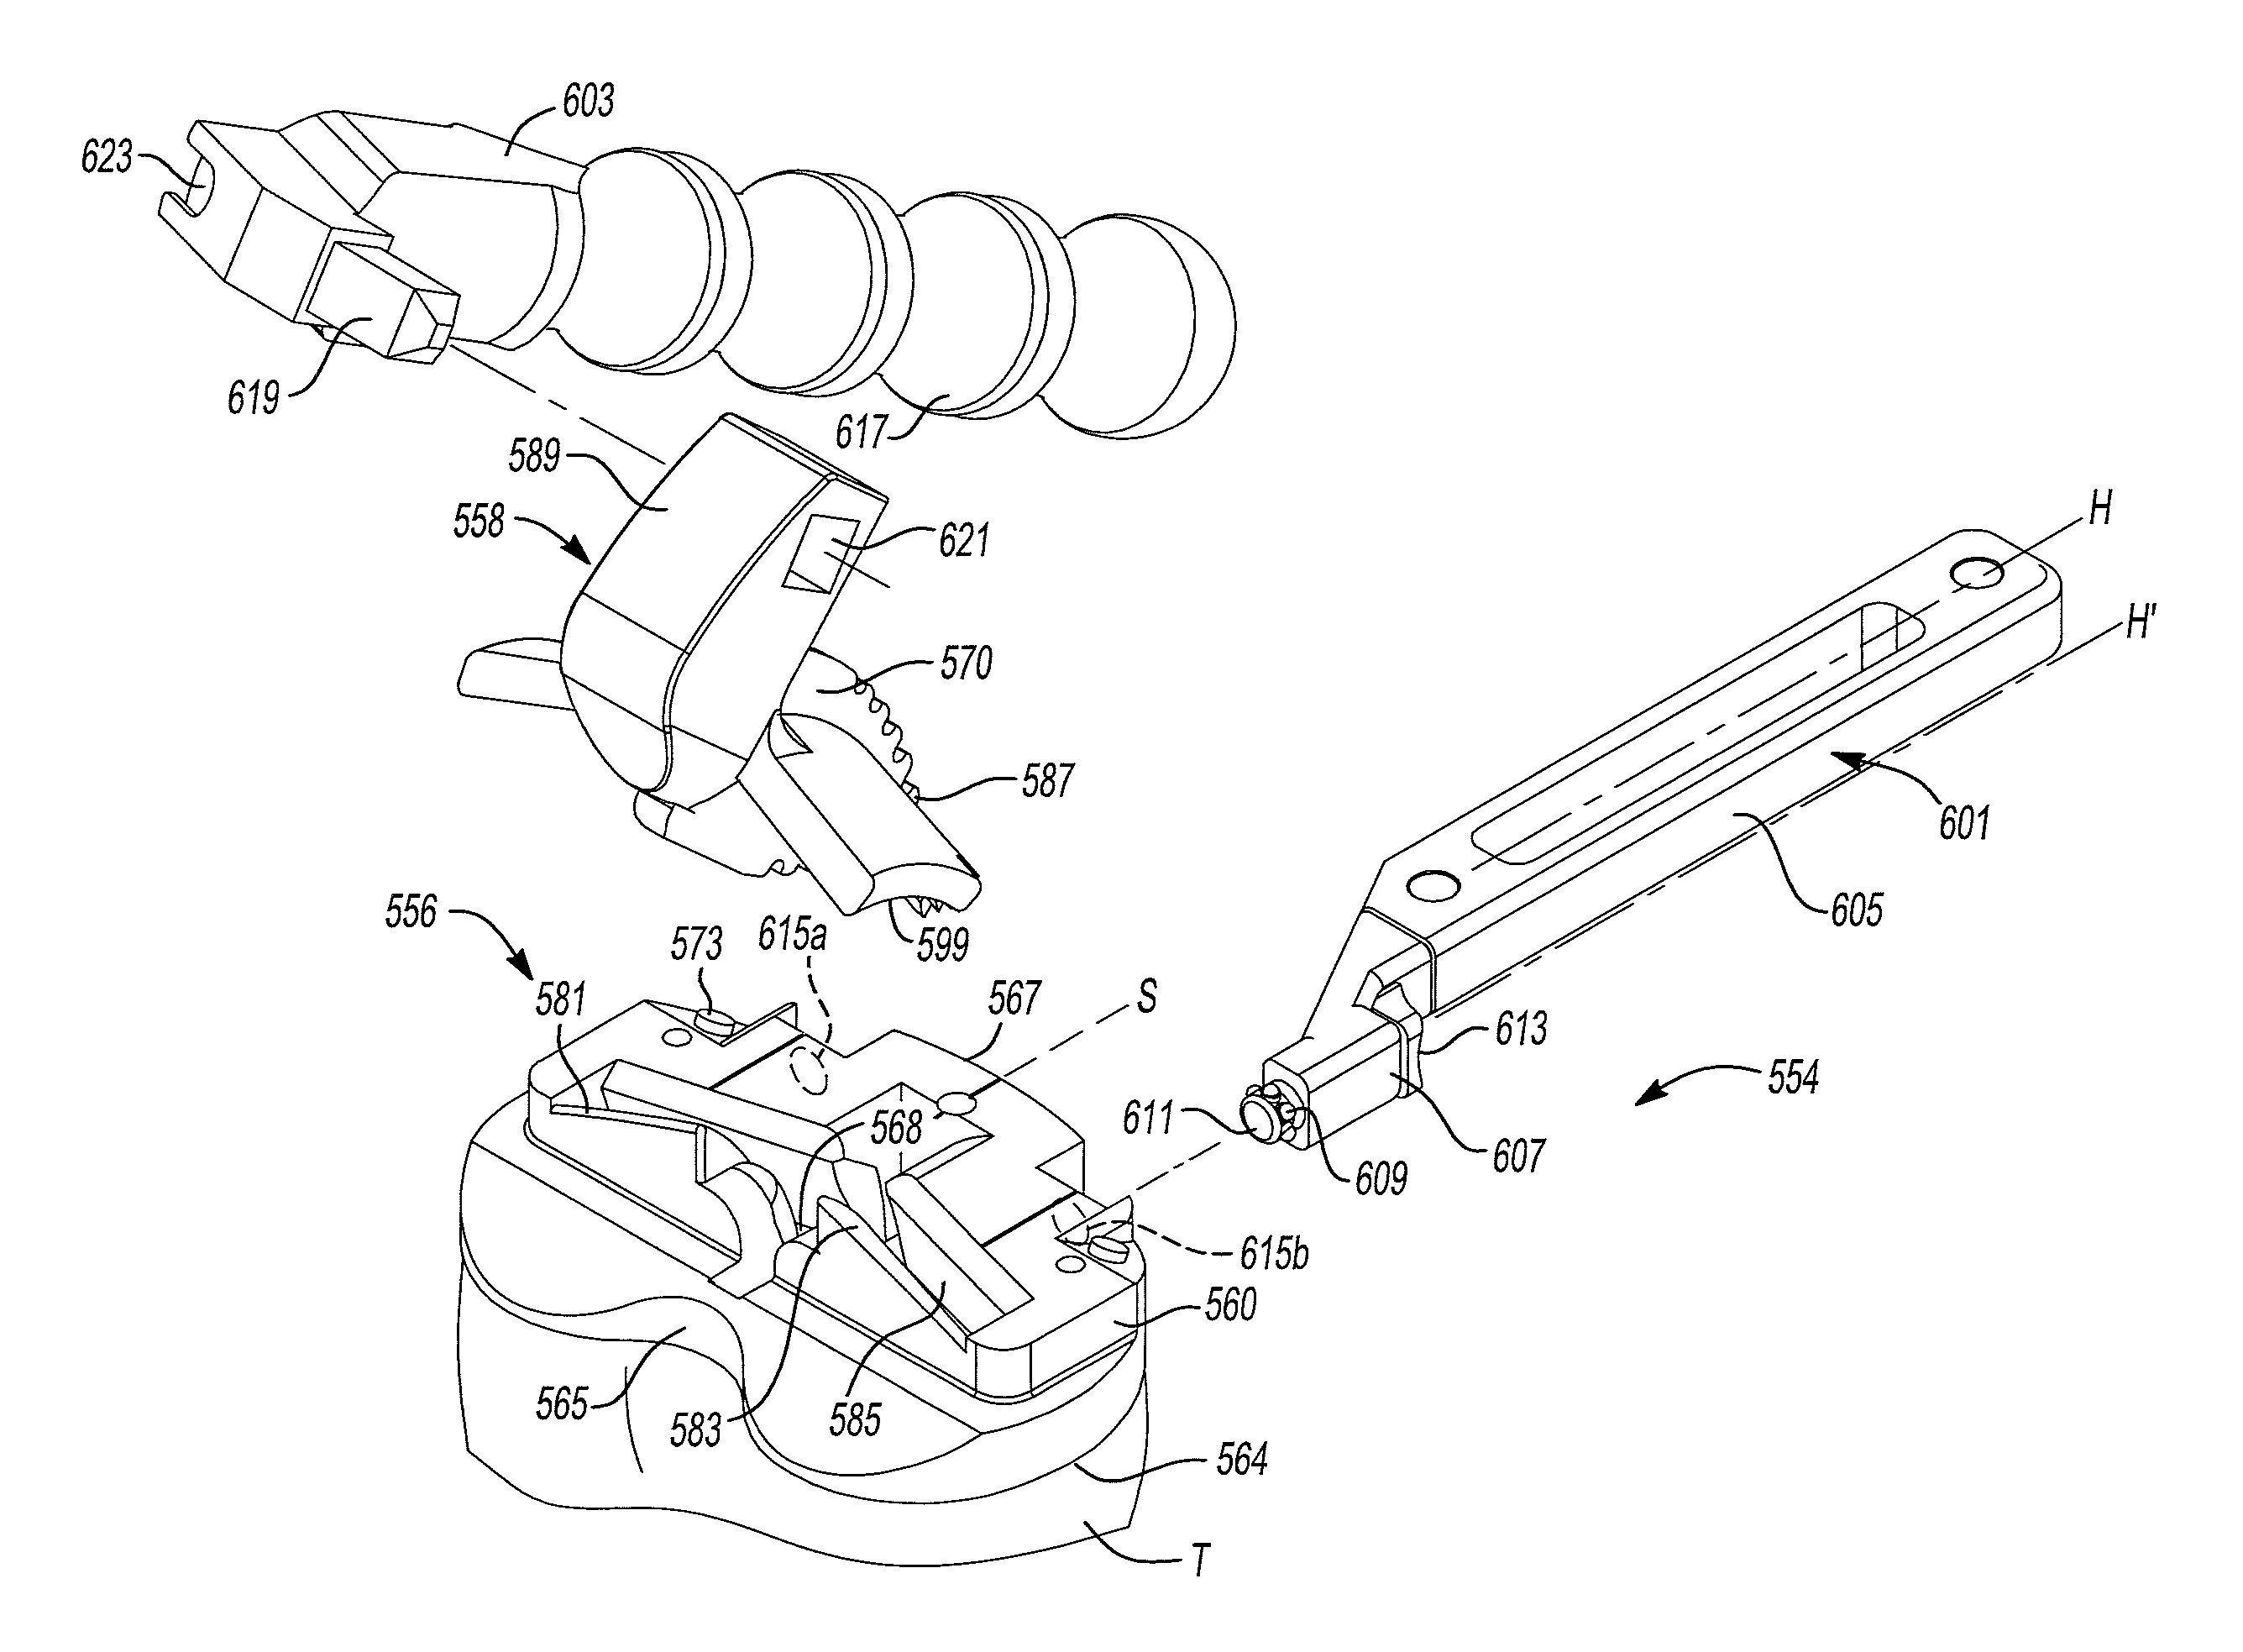 Instrumentation and method for implanting a curved stem tibial tray